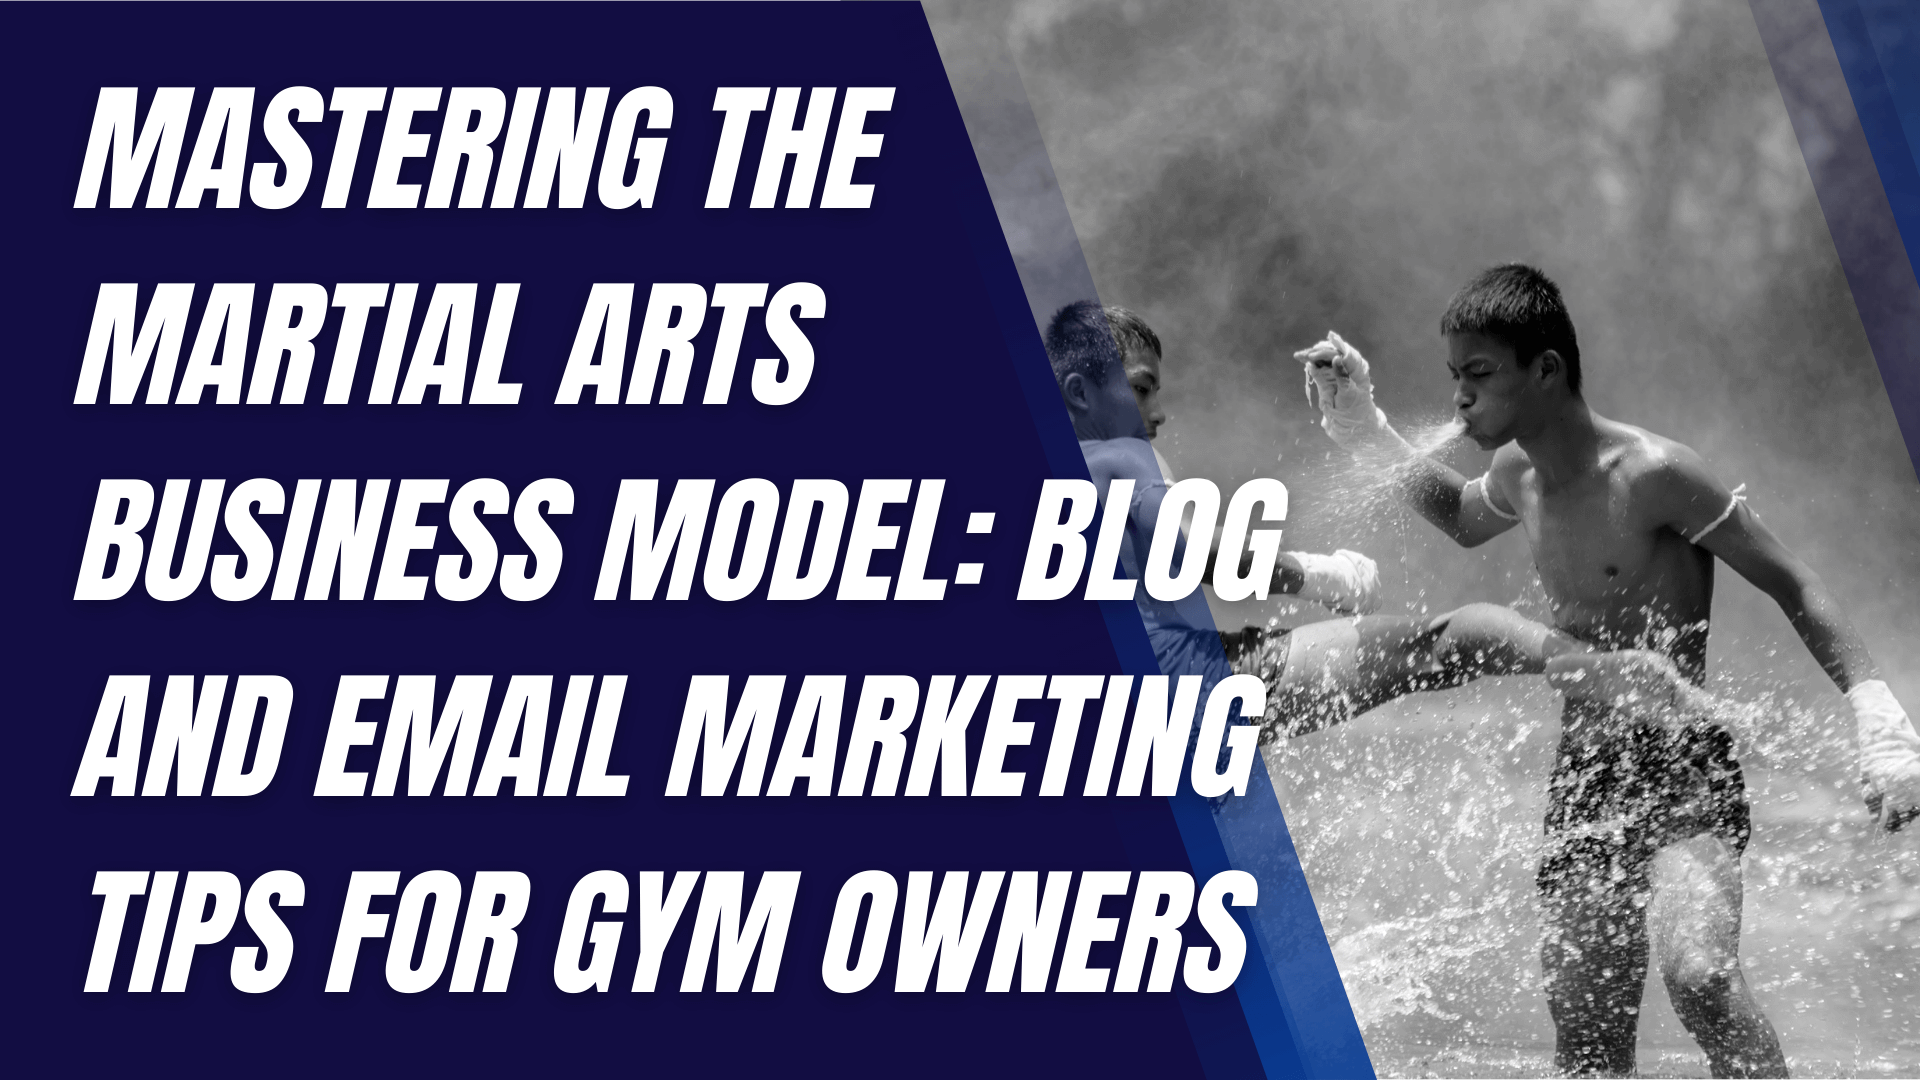 Mastering the Martial Arts Business Model: Blog and Email Marketing Tips for Gym Owners